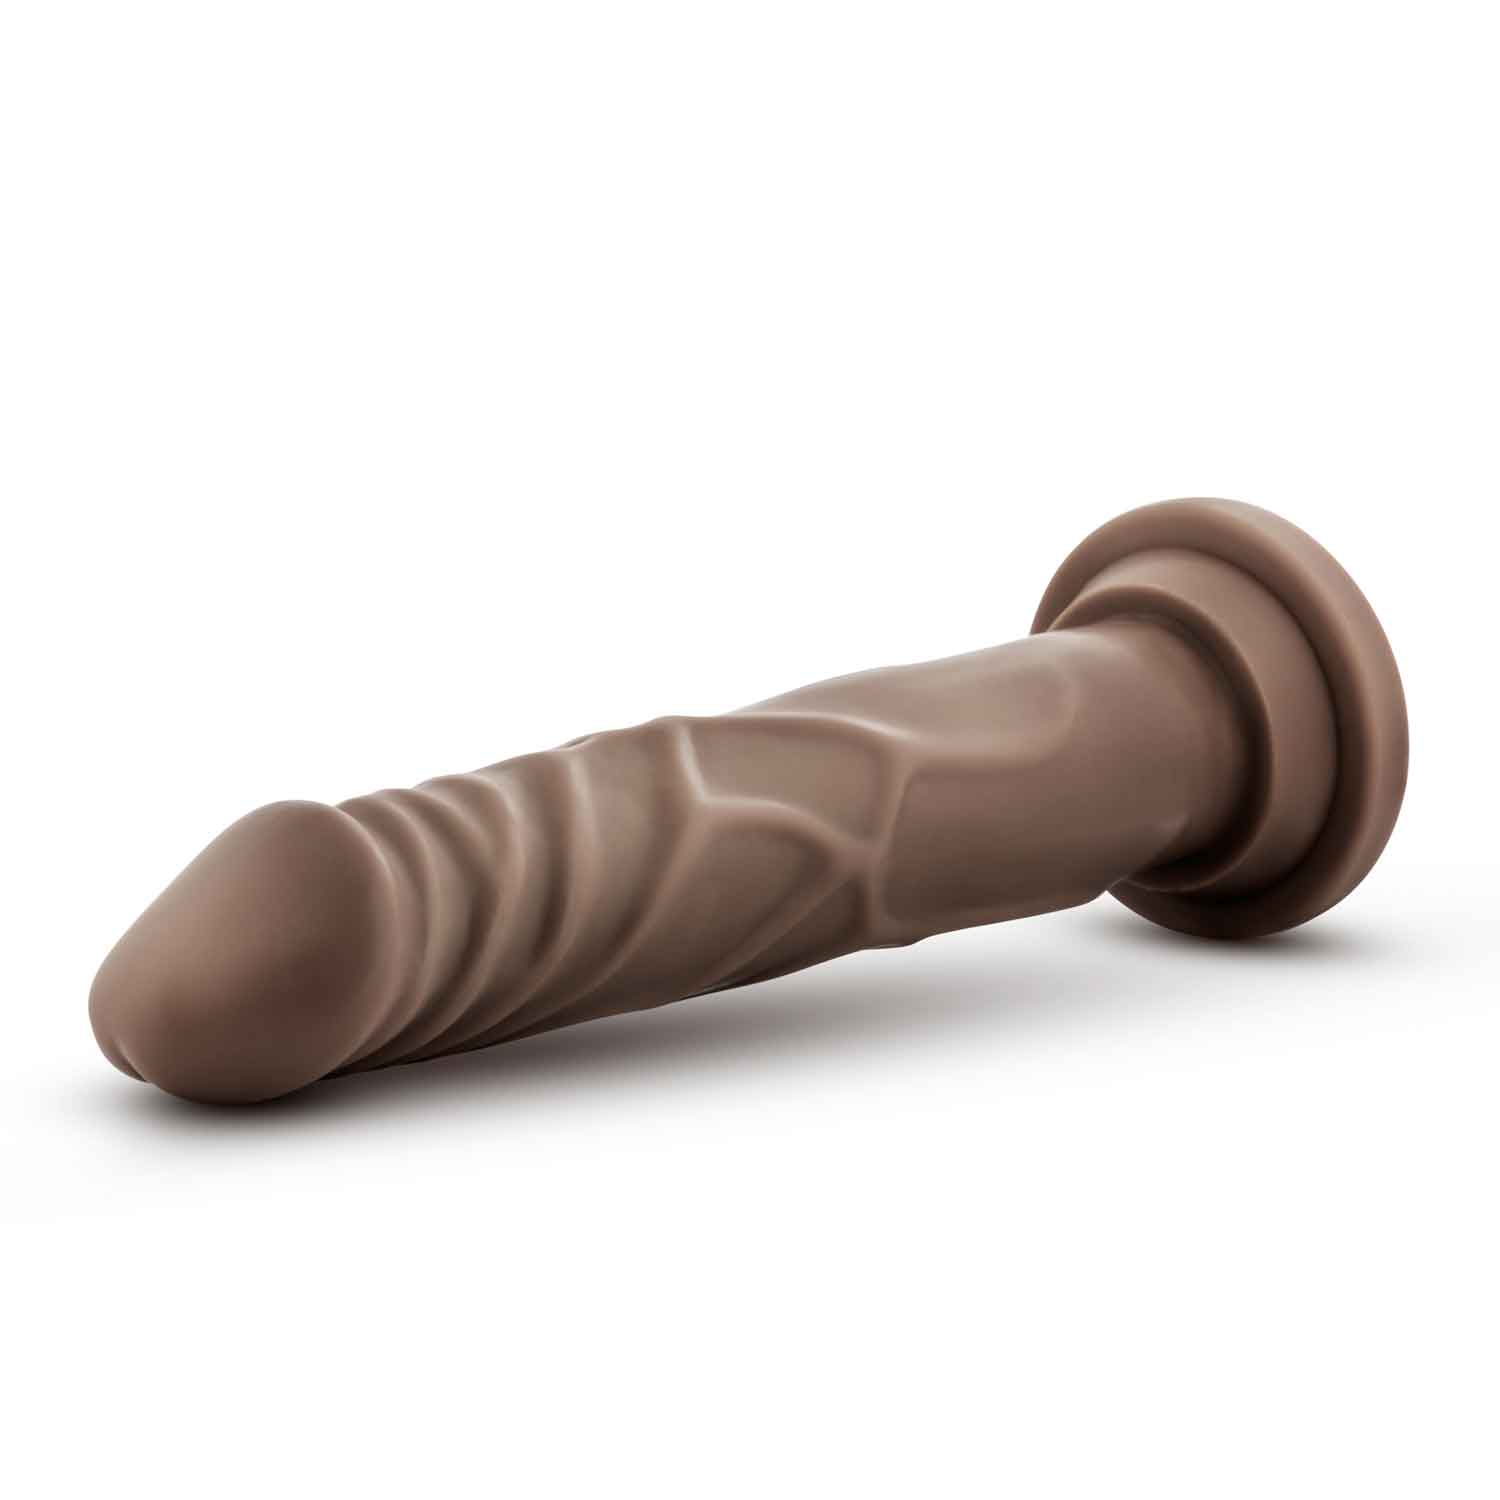 dr. skin silicone dr. carter  inch dong with  suction cup chocolate 